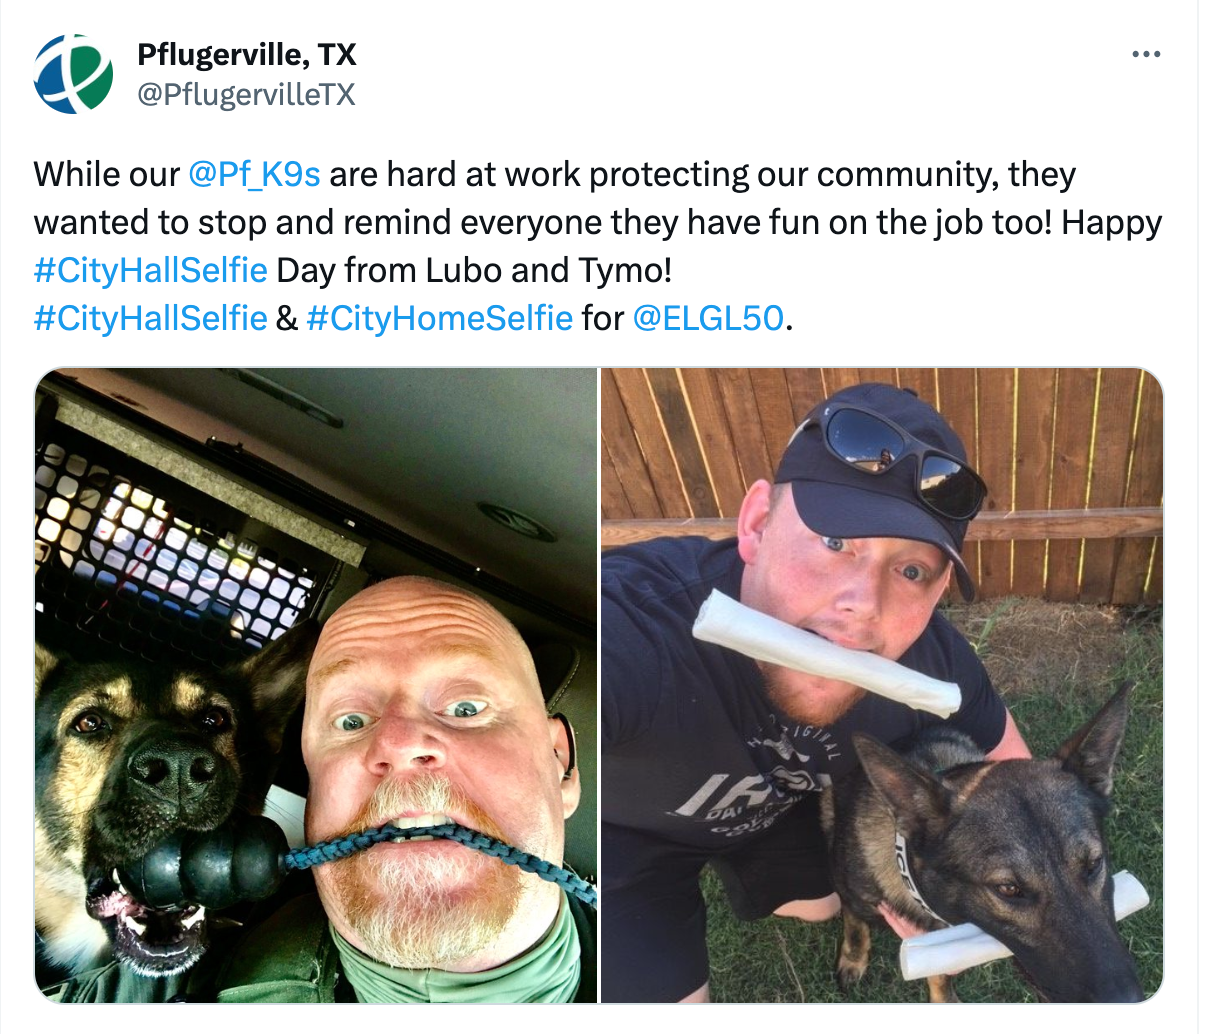 A tweet showing people taking selfies with dogs in Pflugerville, TX.